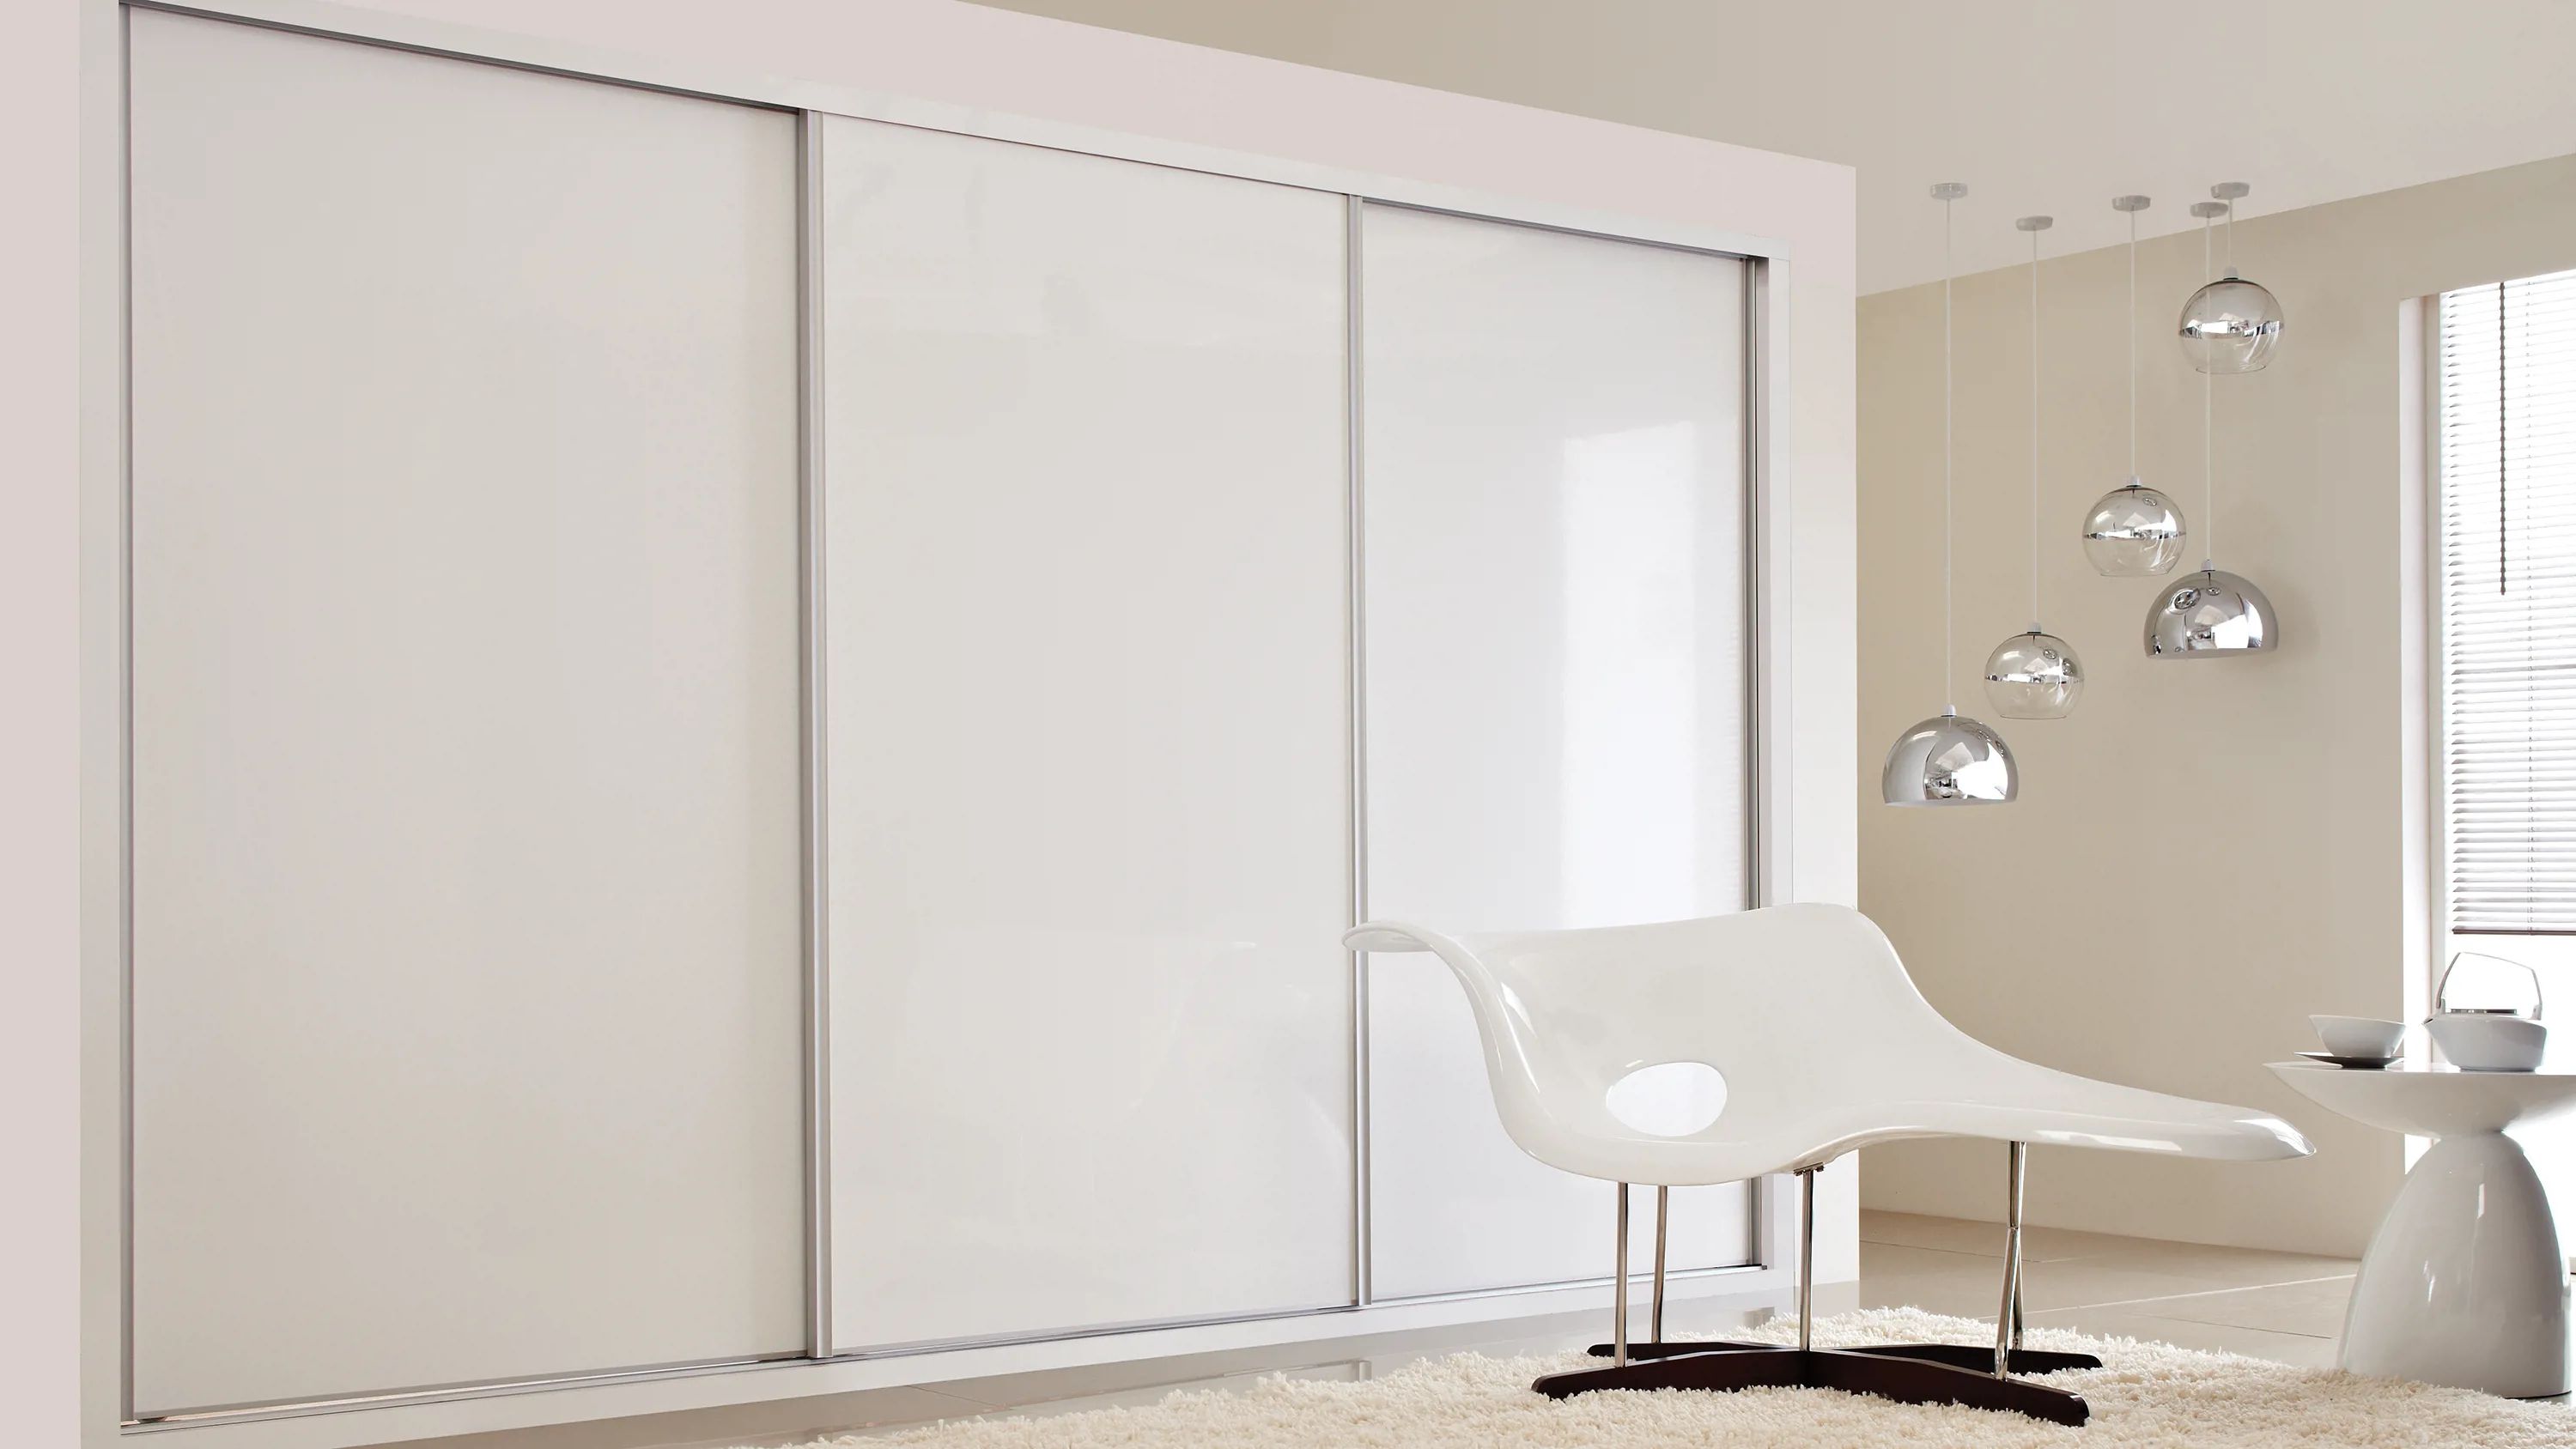 Unearth The High Gloss Fitted Sliding Wardrobes Range For Your Bedroom |  Hammonds Within High Gloss Sliding Wardrobes (View 7 of 15)